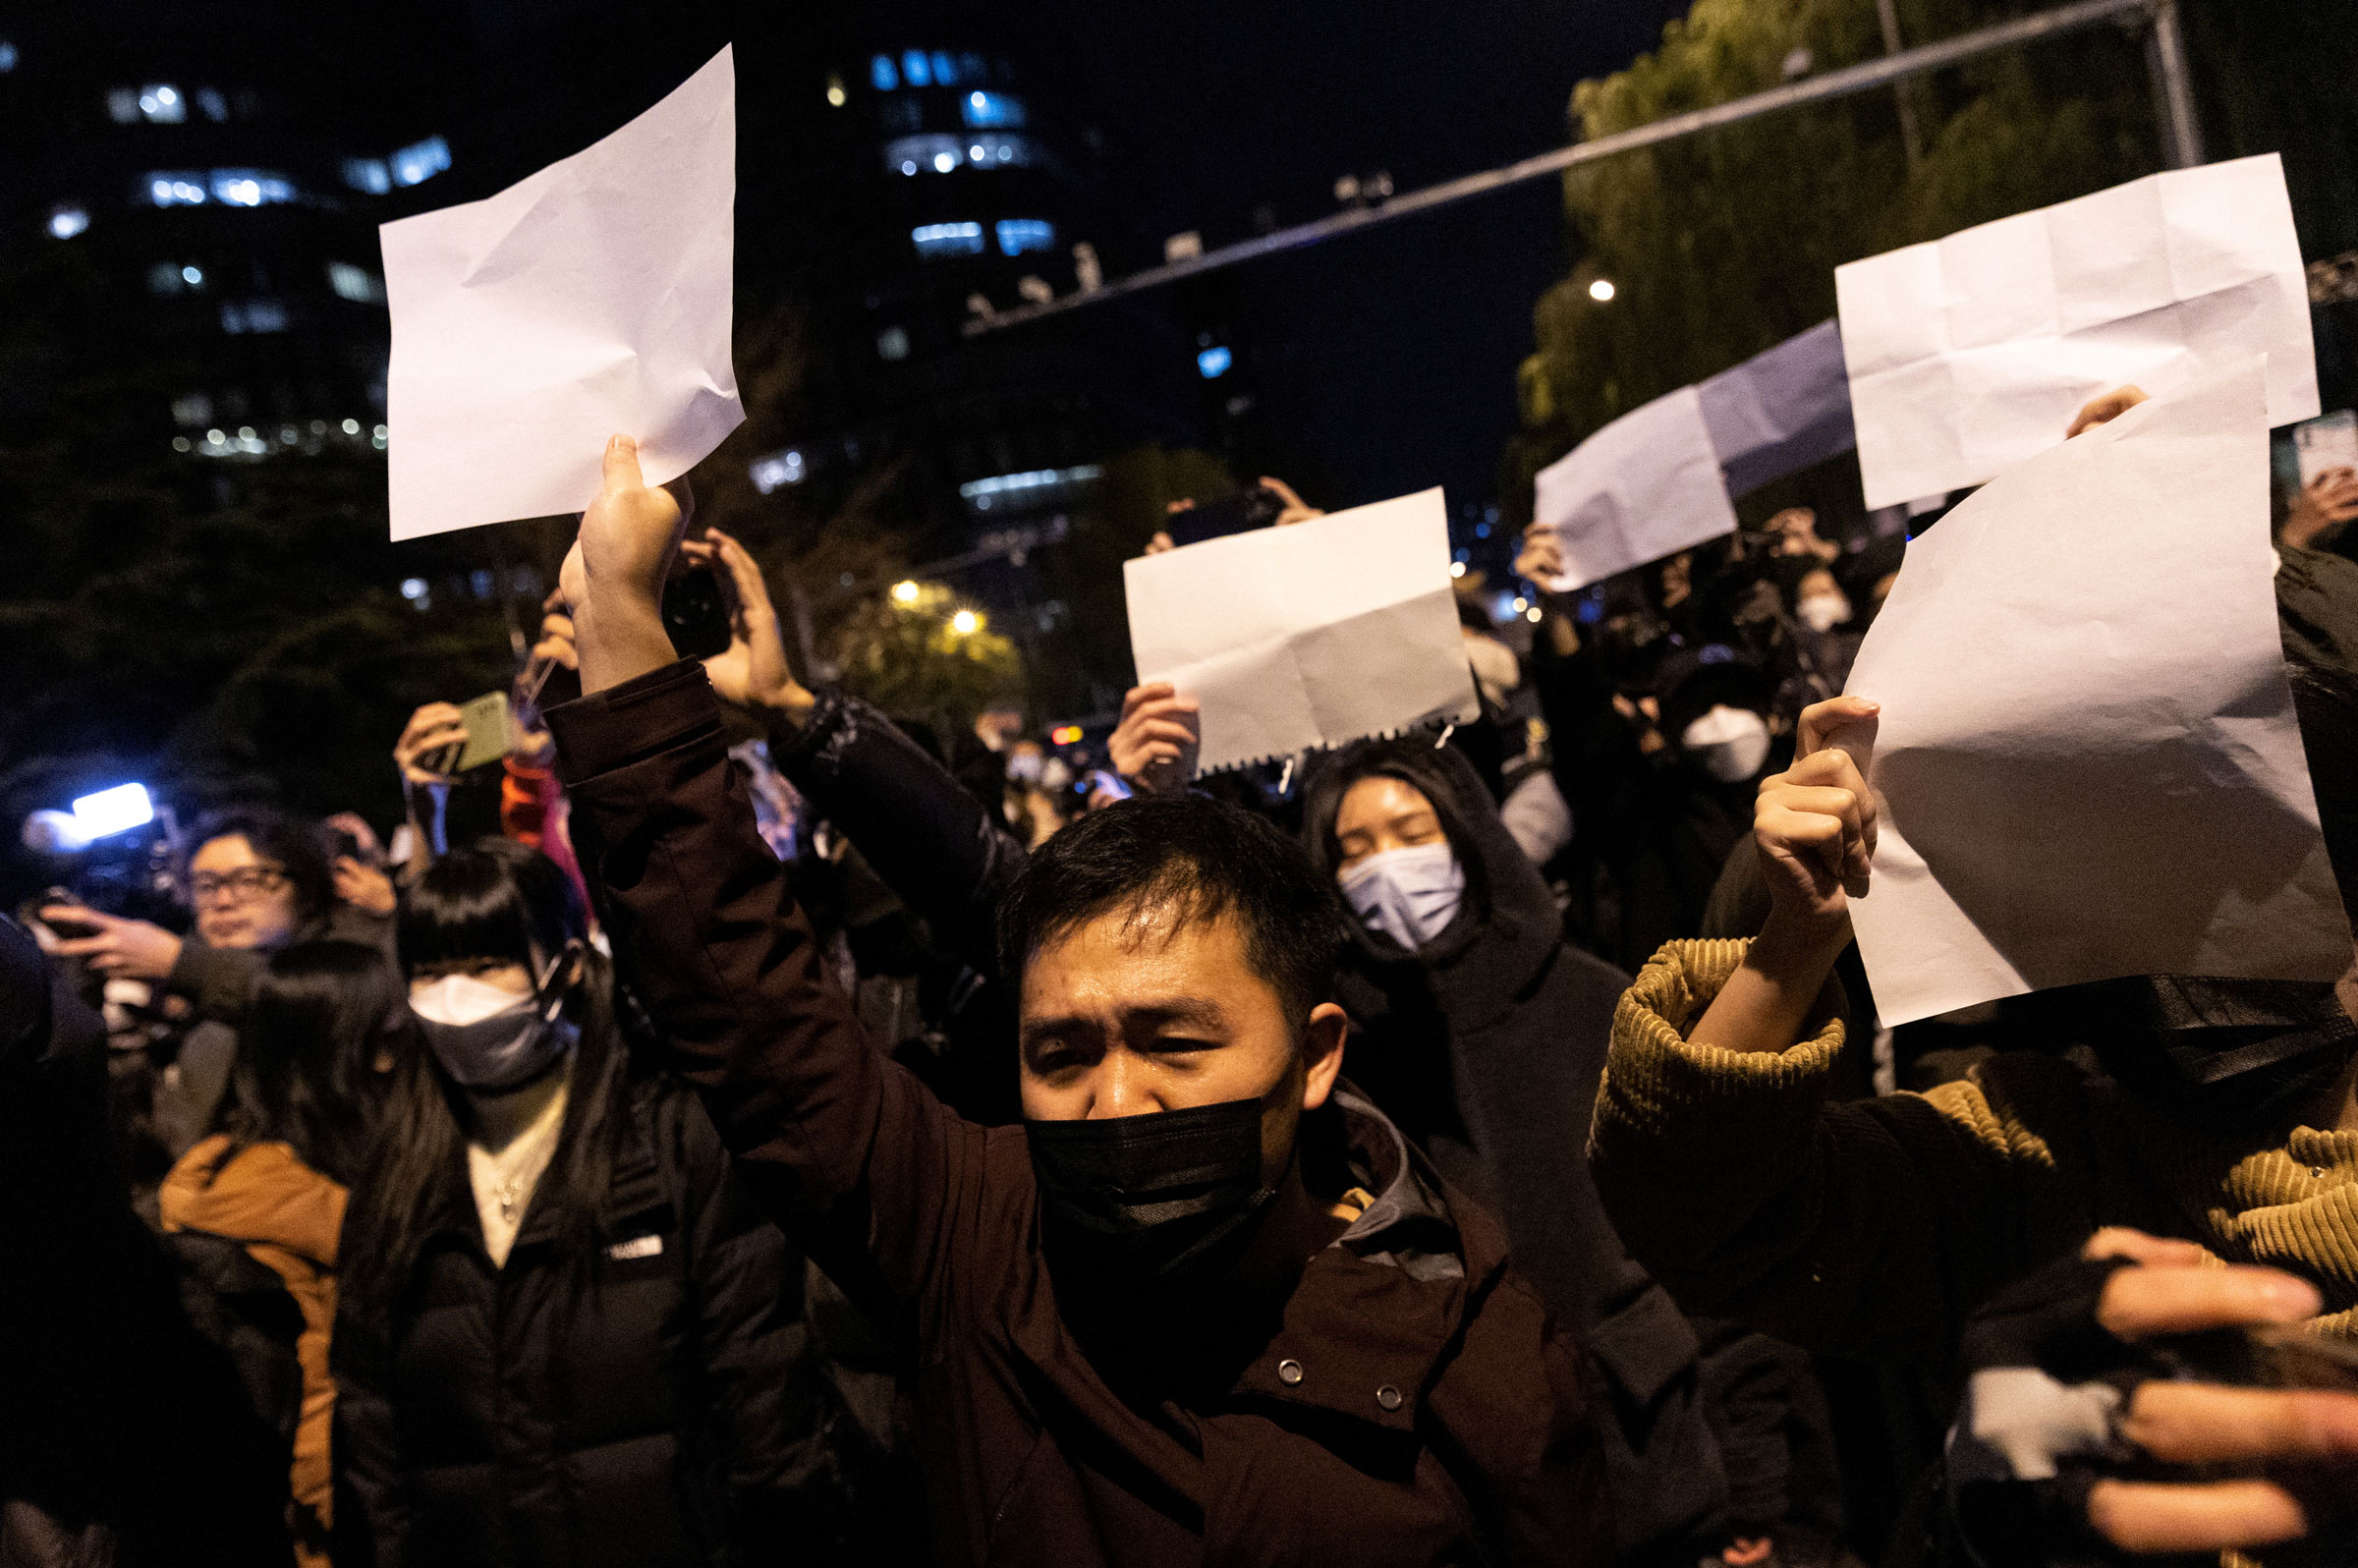 People hold white sheets of paper in protest over COVID-19 restrictions, after a vigil for the victims of a fire in Urumqi, as outbreaks of COVID-19 continue, in Beijing, China, on Nov. 28, 2022. (Thomas Peter—Reuters)